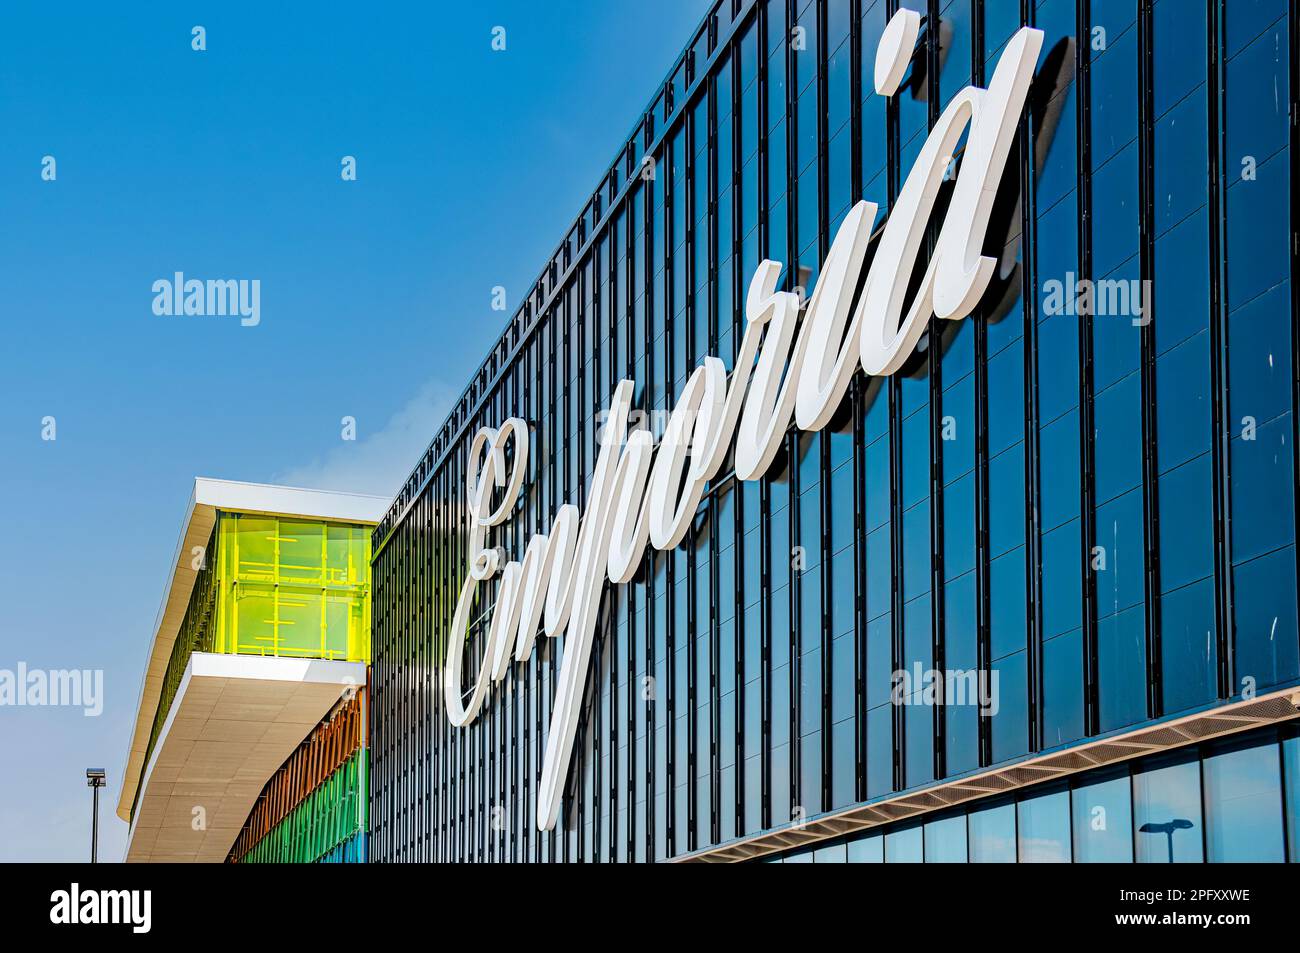 MALMO, SWEDEN - MAY 13: Emporia facade on May 13, 2013 in Malmo. Luxury shopping mall designed by architect Gert Wingardh's Studio. Stock Photo